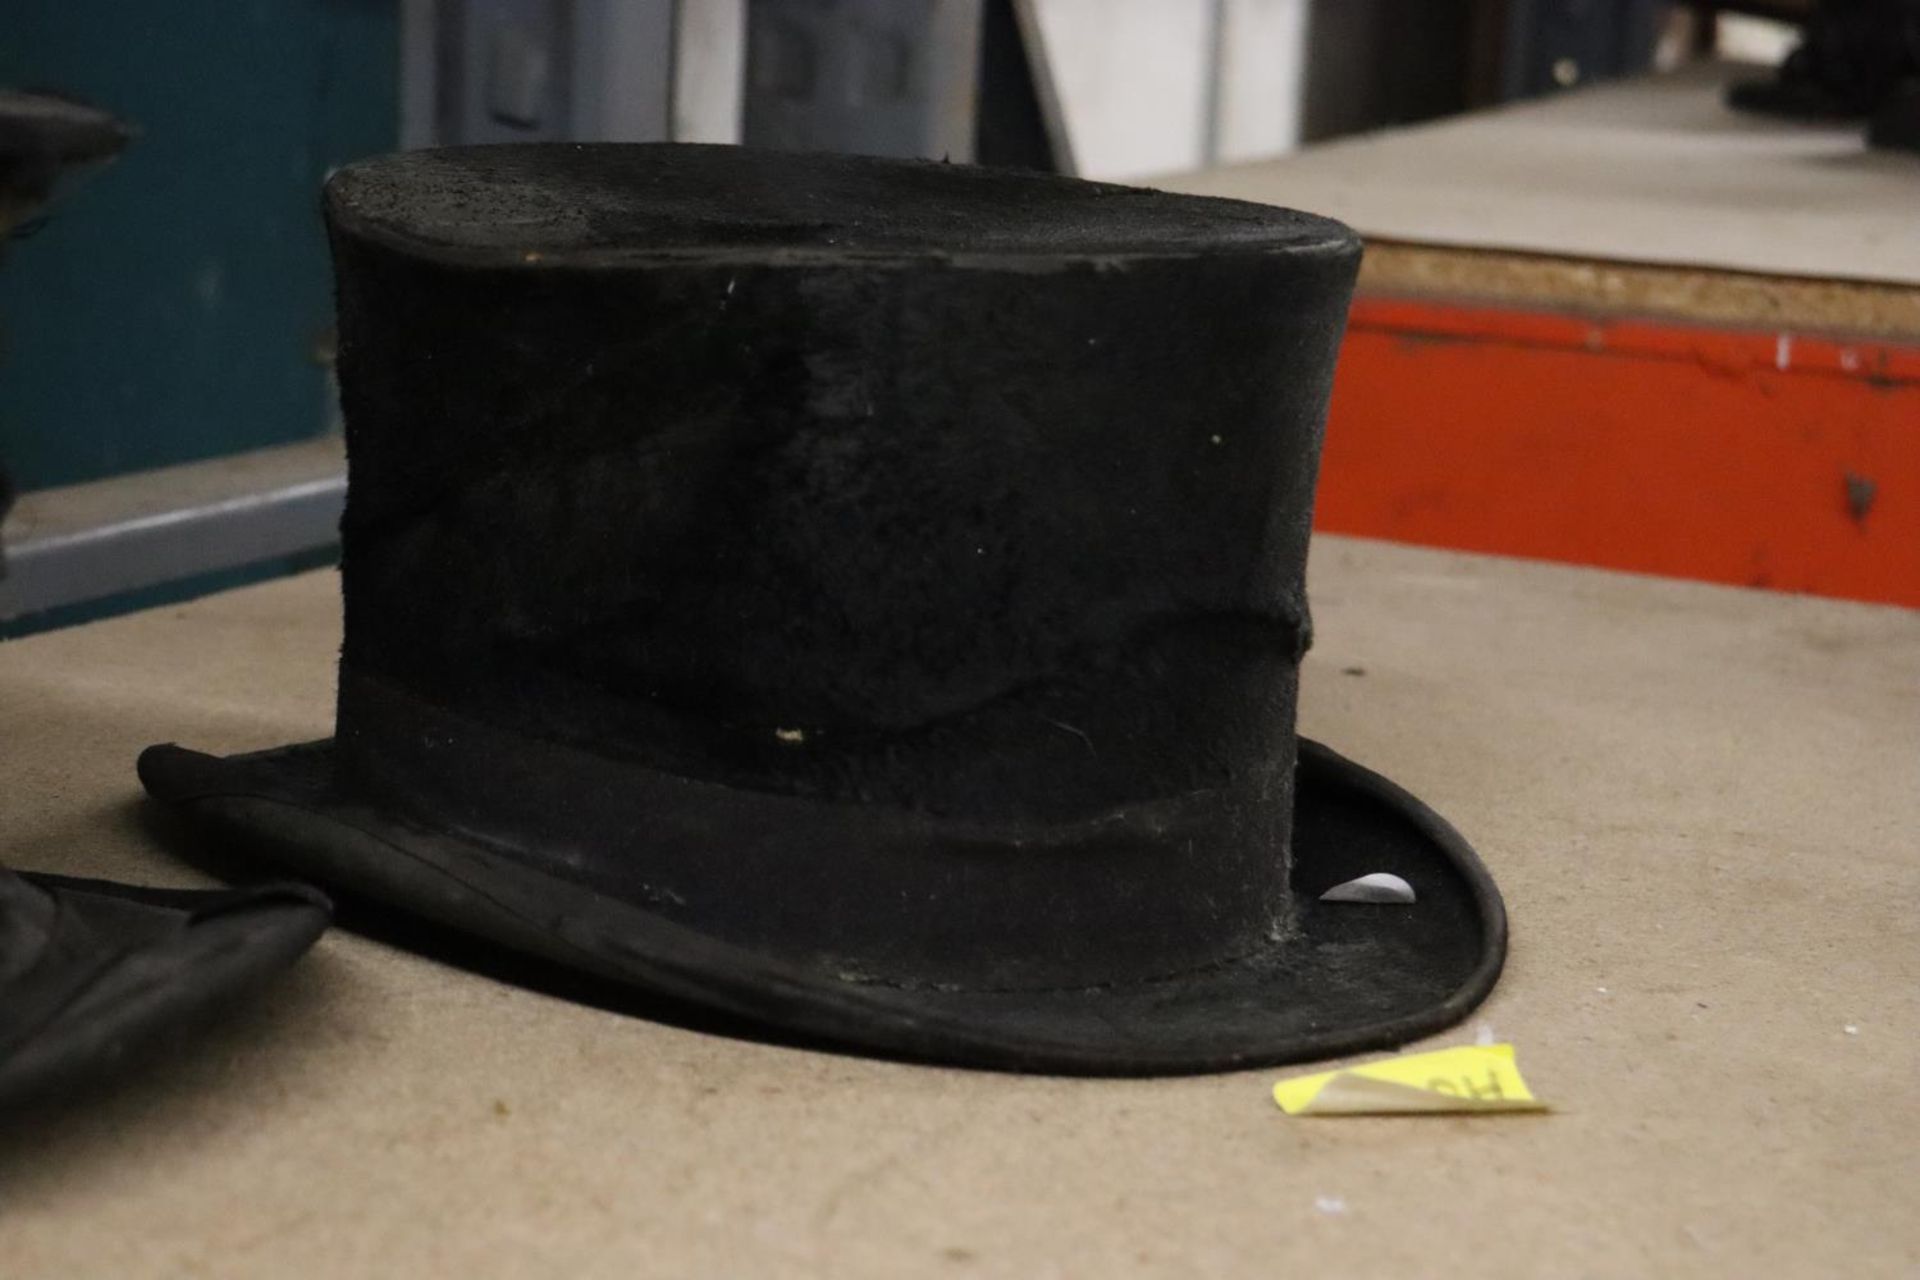 TWO VINTAGE TOP HATS AND A BOWLER HAT - TOP HATS A/F - Bild 4 aus 6